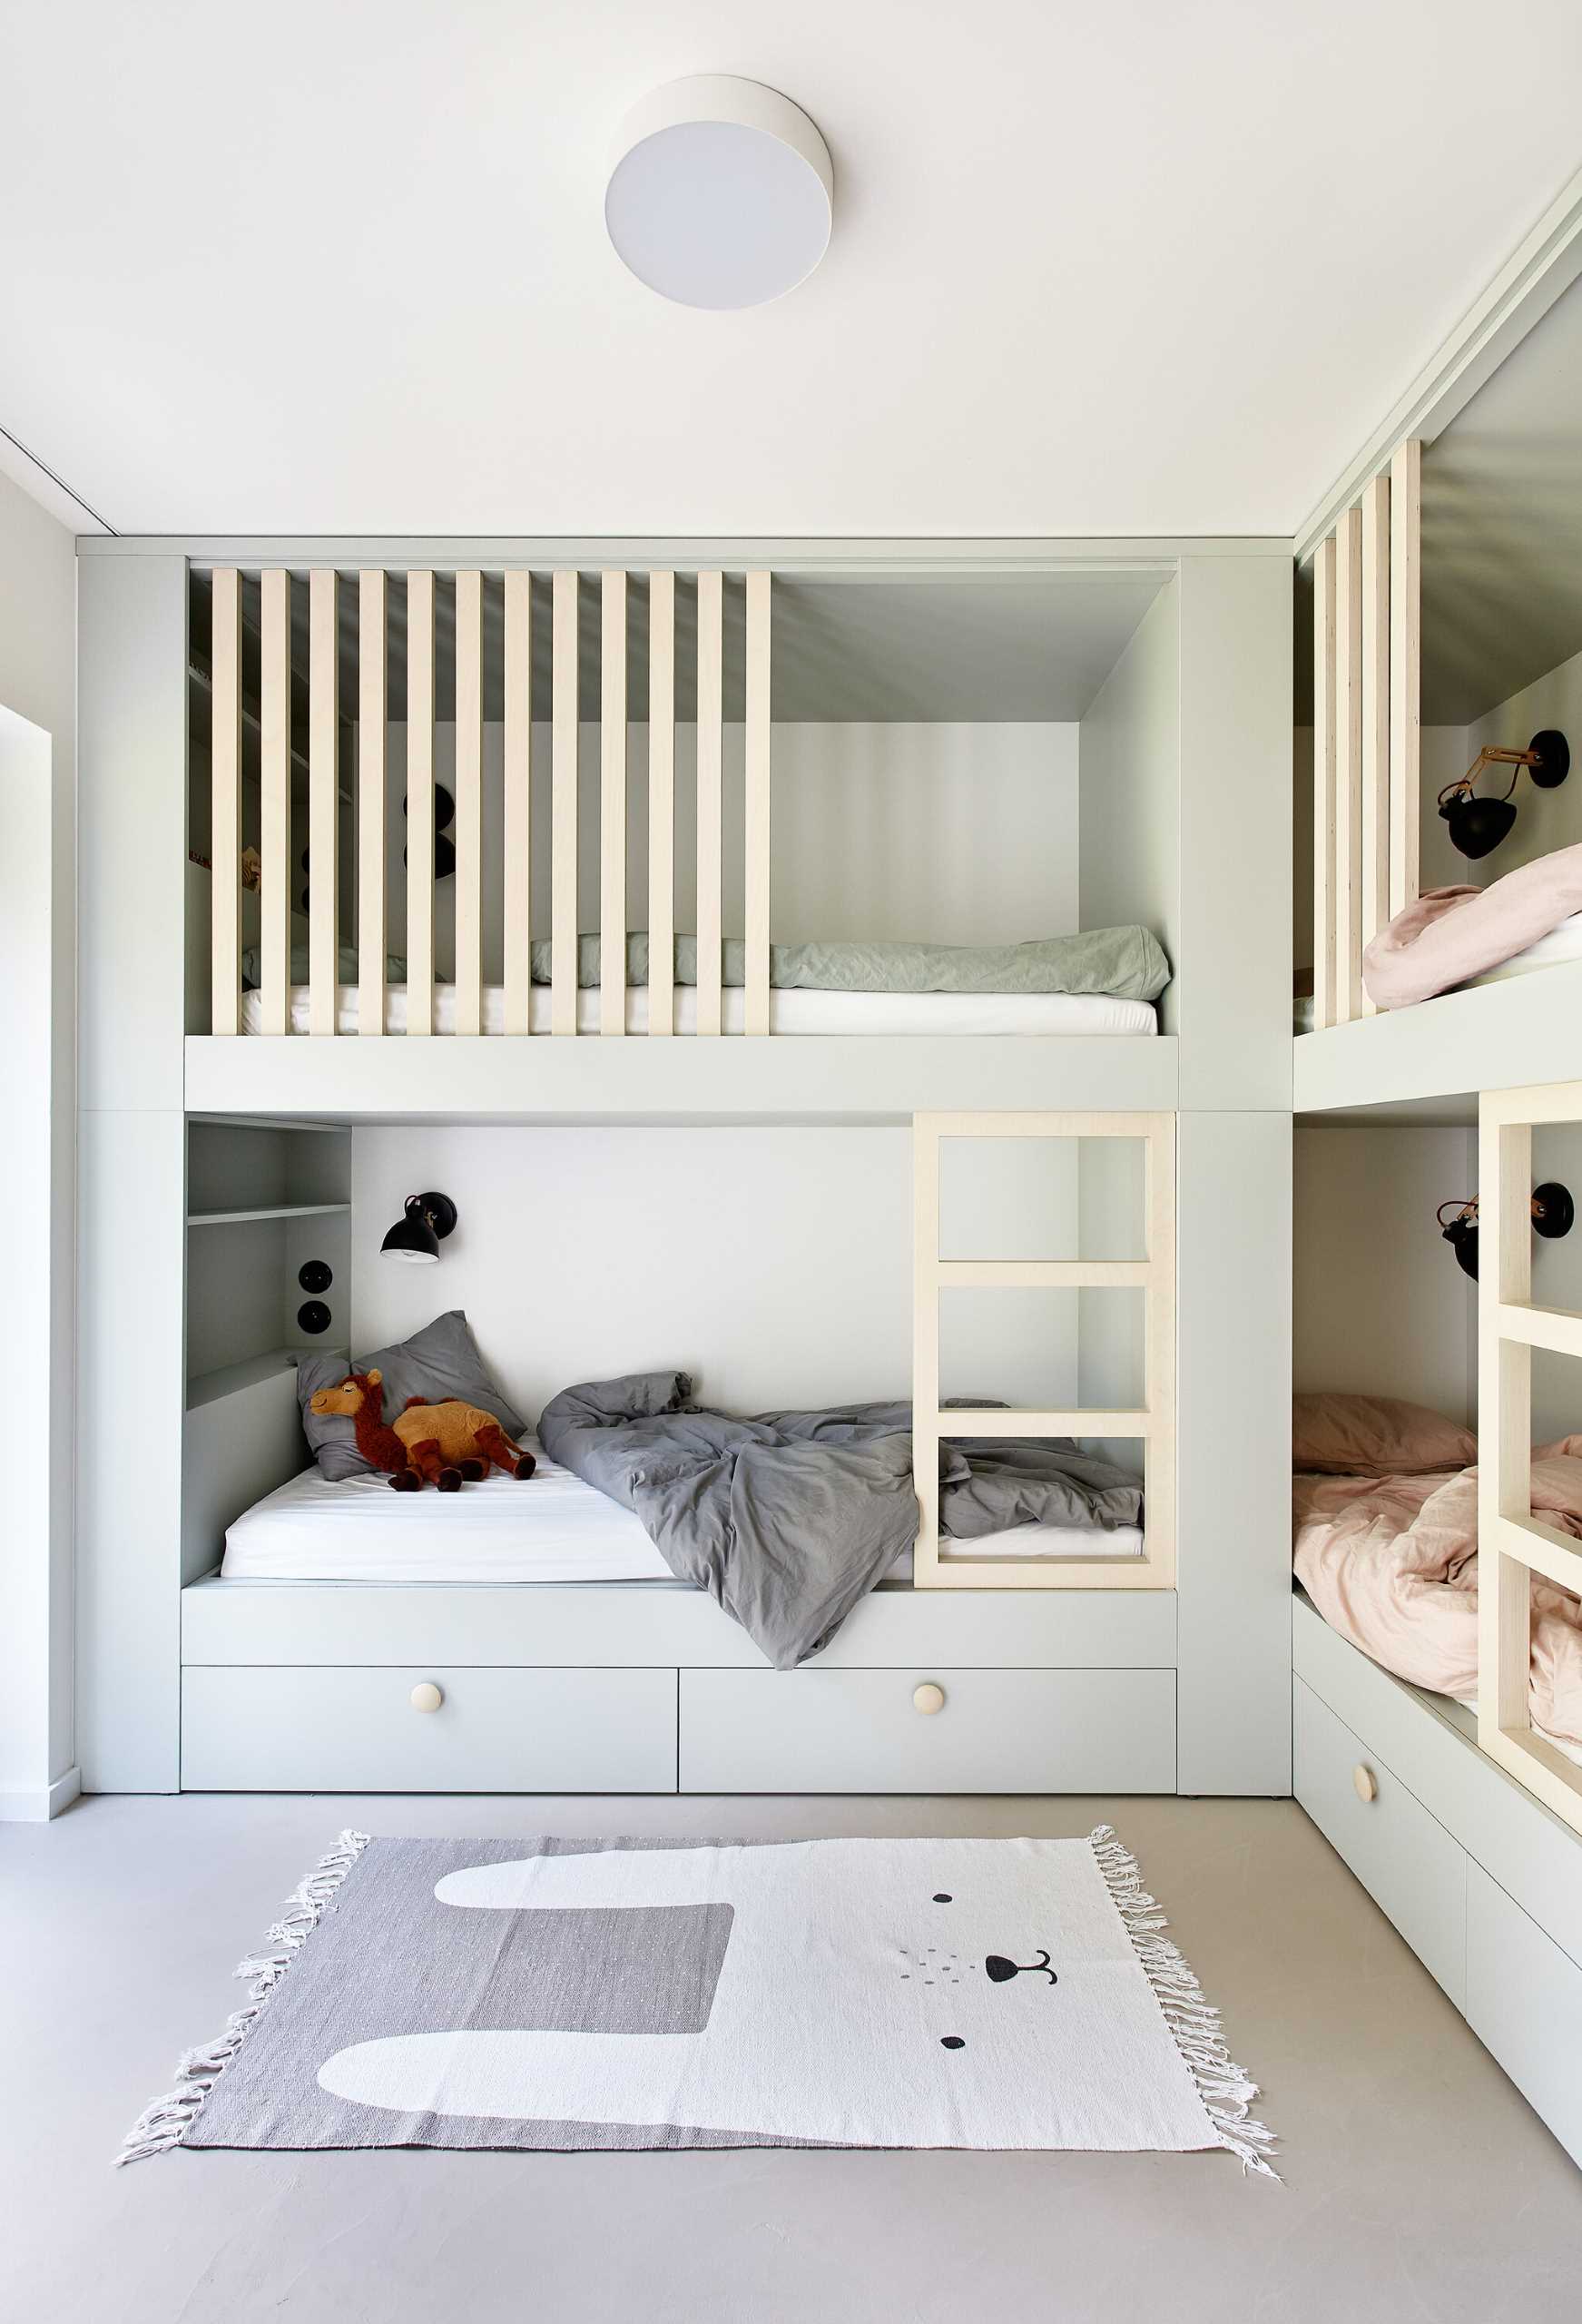 There's multiple built-in bunk beds that have been included in a bedroom for the children.